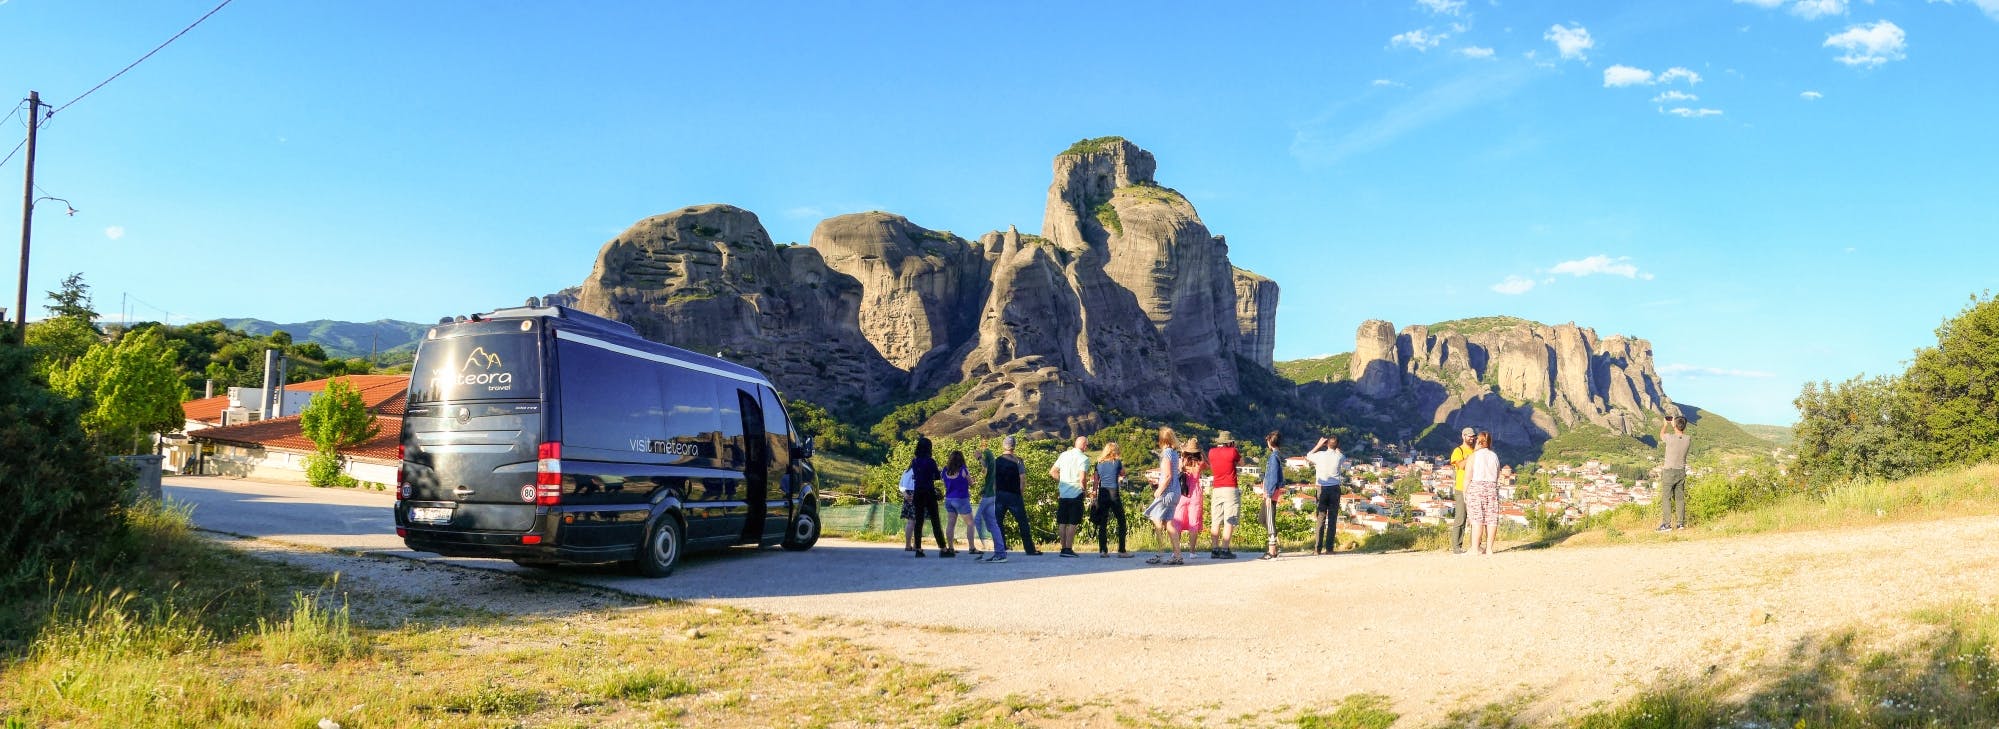 Meteora half day morning tour with hotel pick up Musement